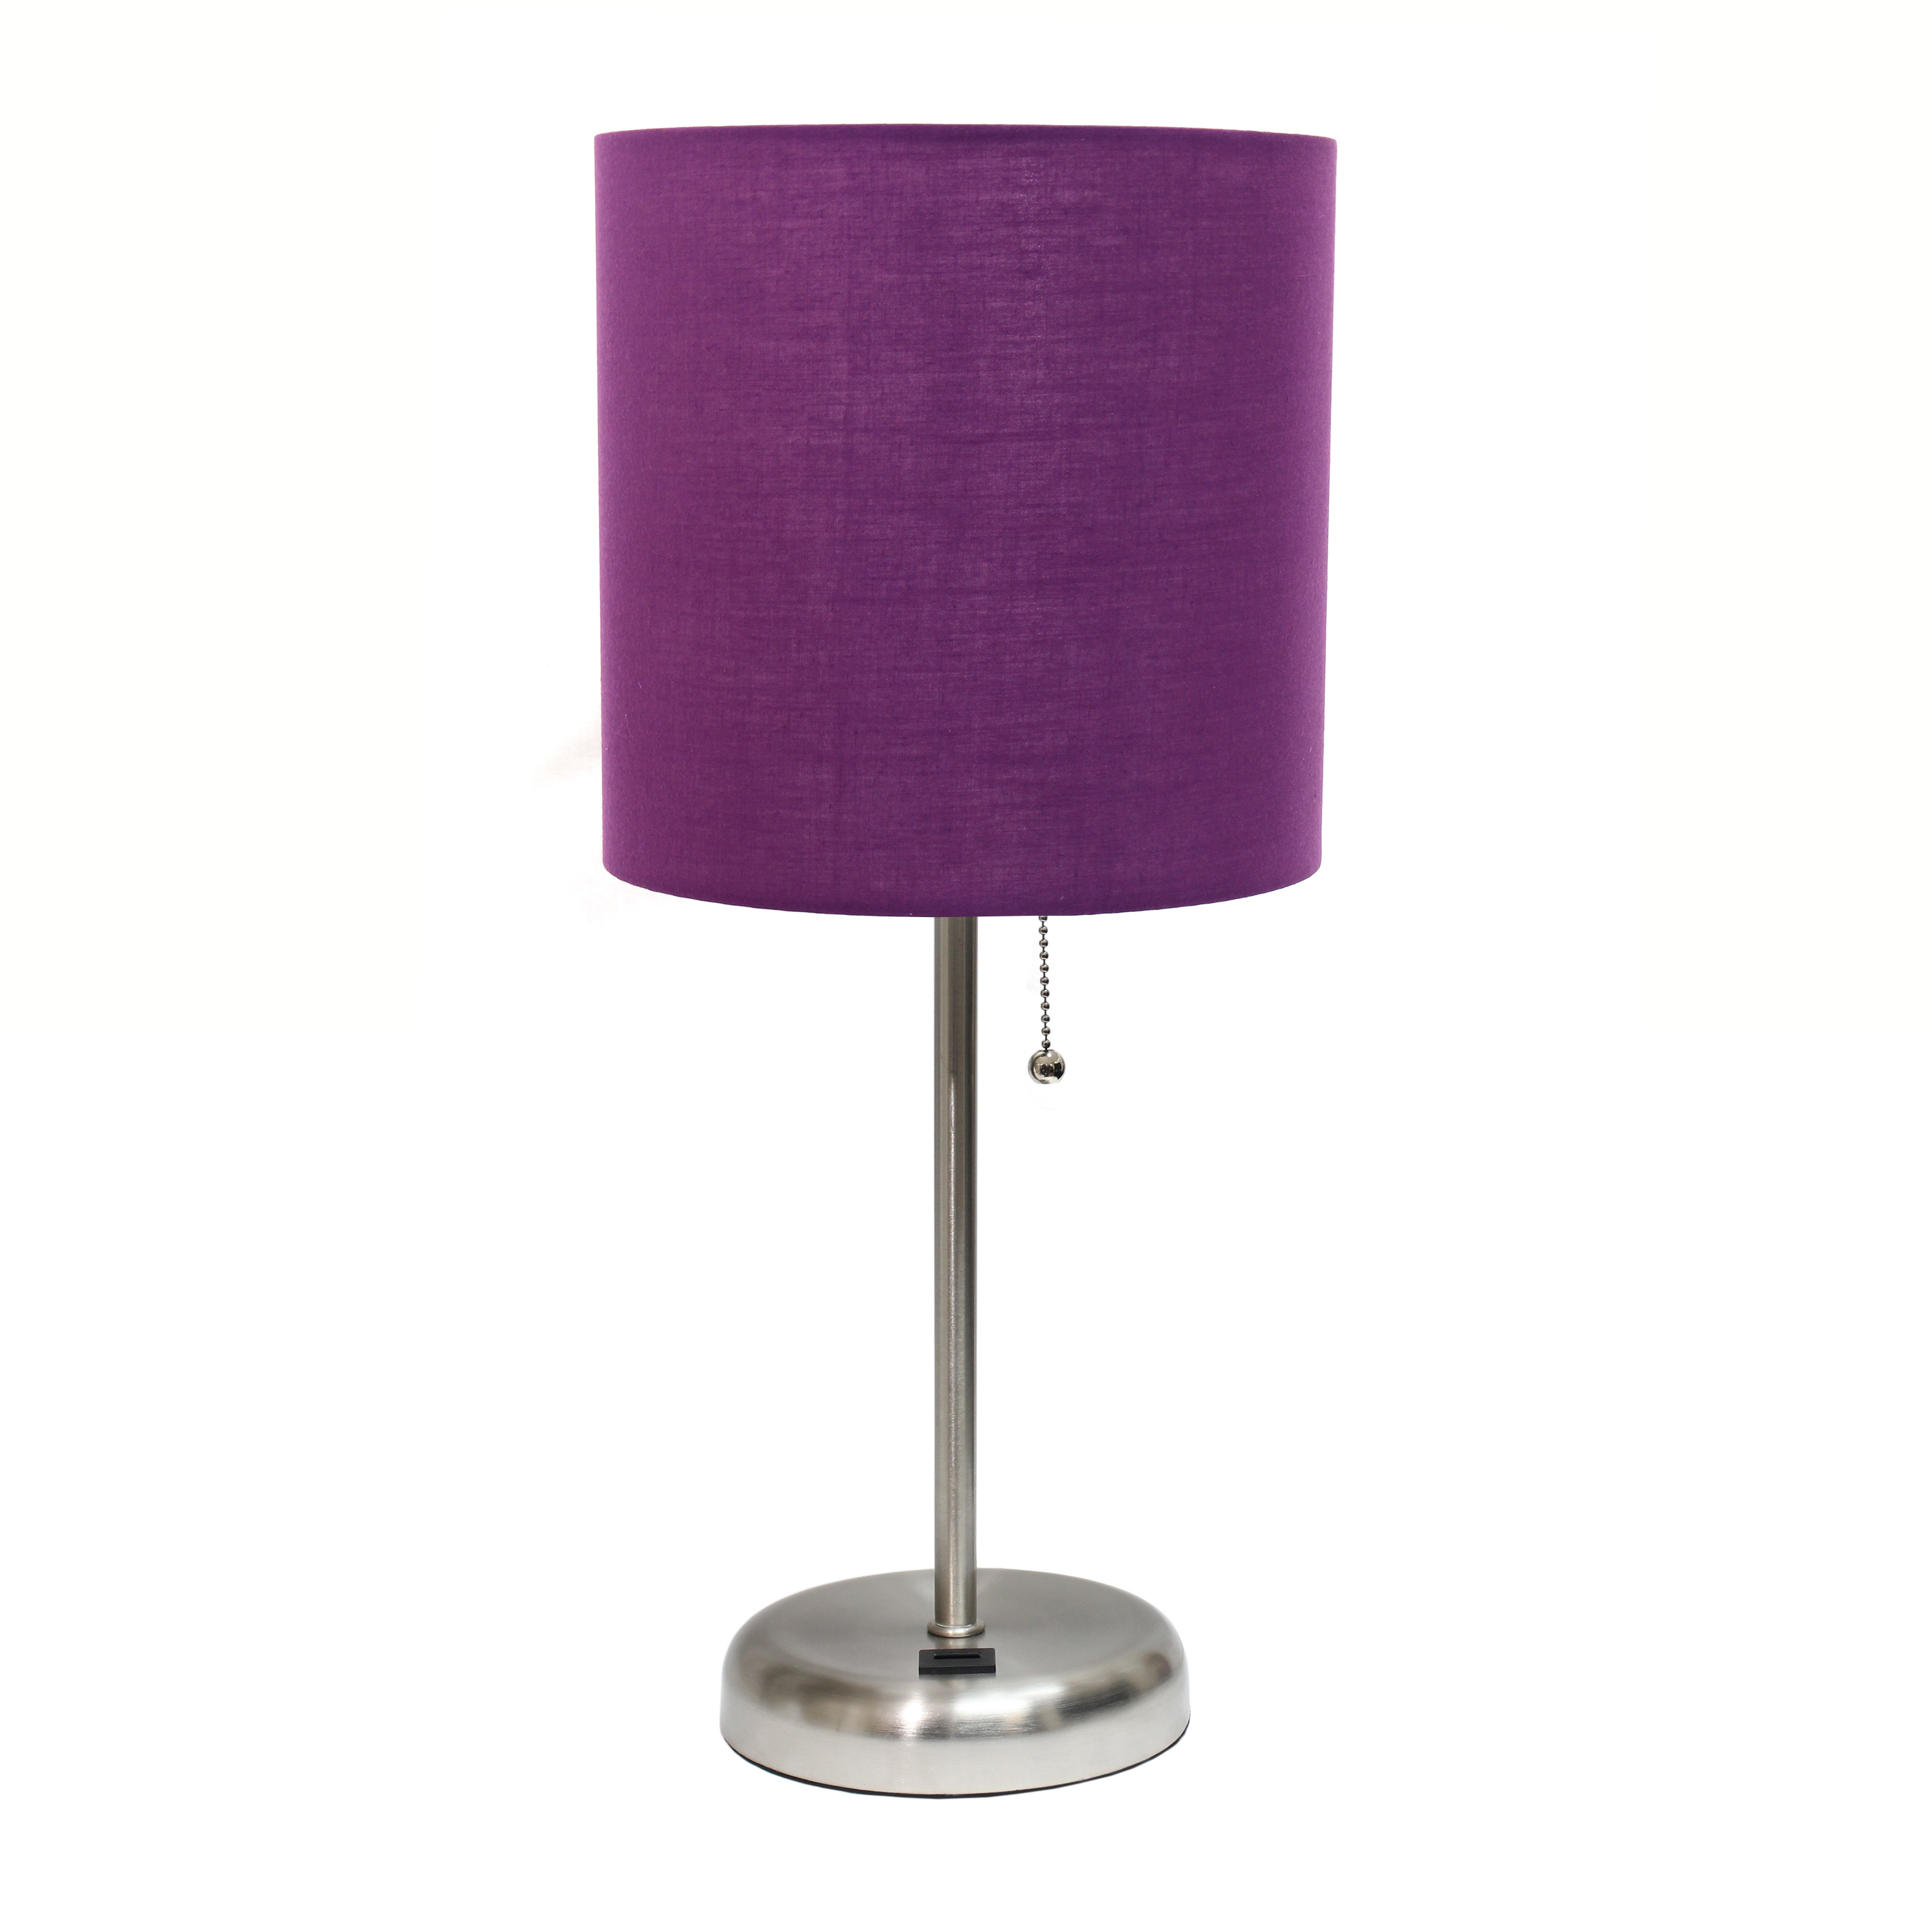 LimeLights Stick Lamp with USB charging port and Fabric Shade, Purple